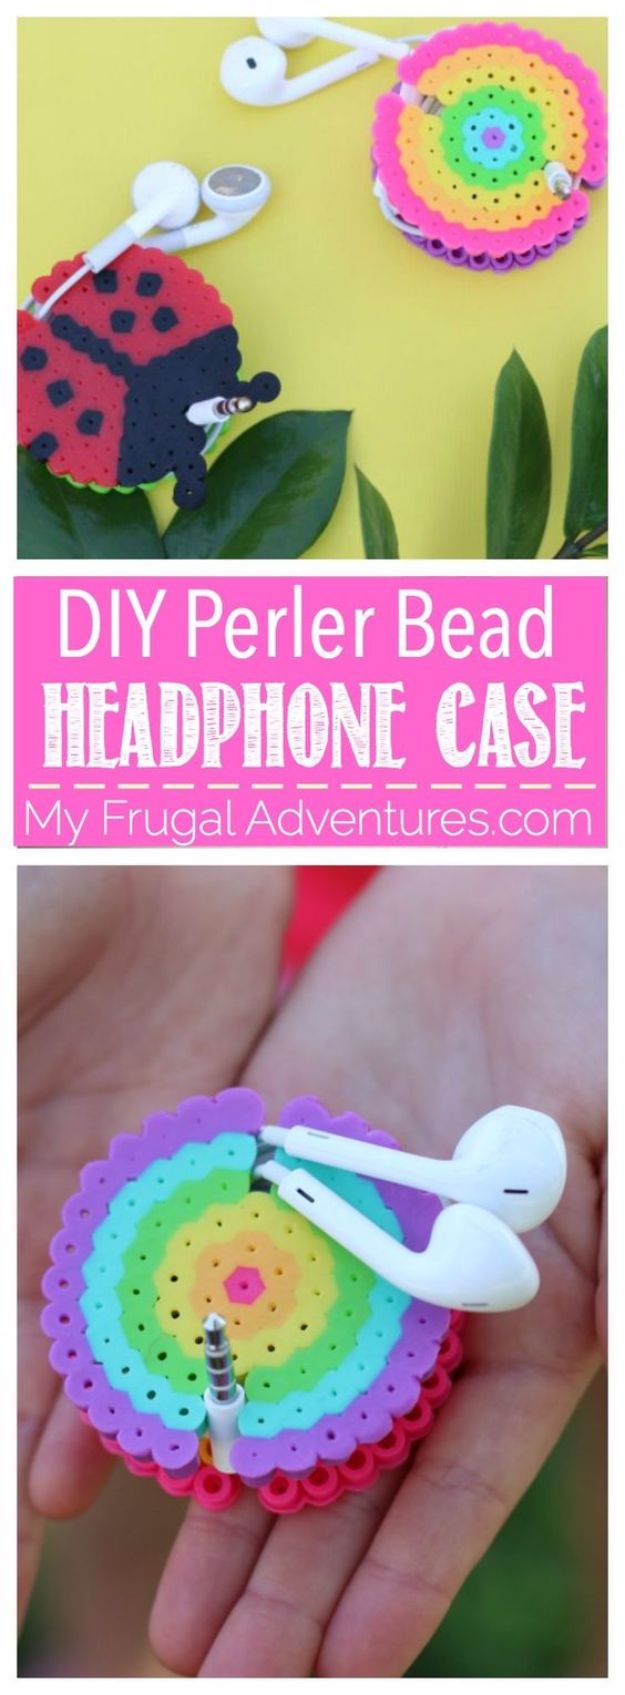 Best DIY Ideas for Teens To Make This Summer - DIY Perler Bead Headphone Case - Fun and Easy Crafts, Room Decor, Toys and Craft Projects to Make And Sell - Cool Gifts for Friends, Awesome Things To Do When You Are Bored - Teenagers - Boys and Girls Love Making These Creative Projects With Step by Step Tutorials and Instructions #diyideas #summer #teencrafts #crafts